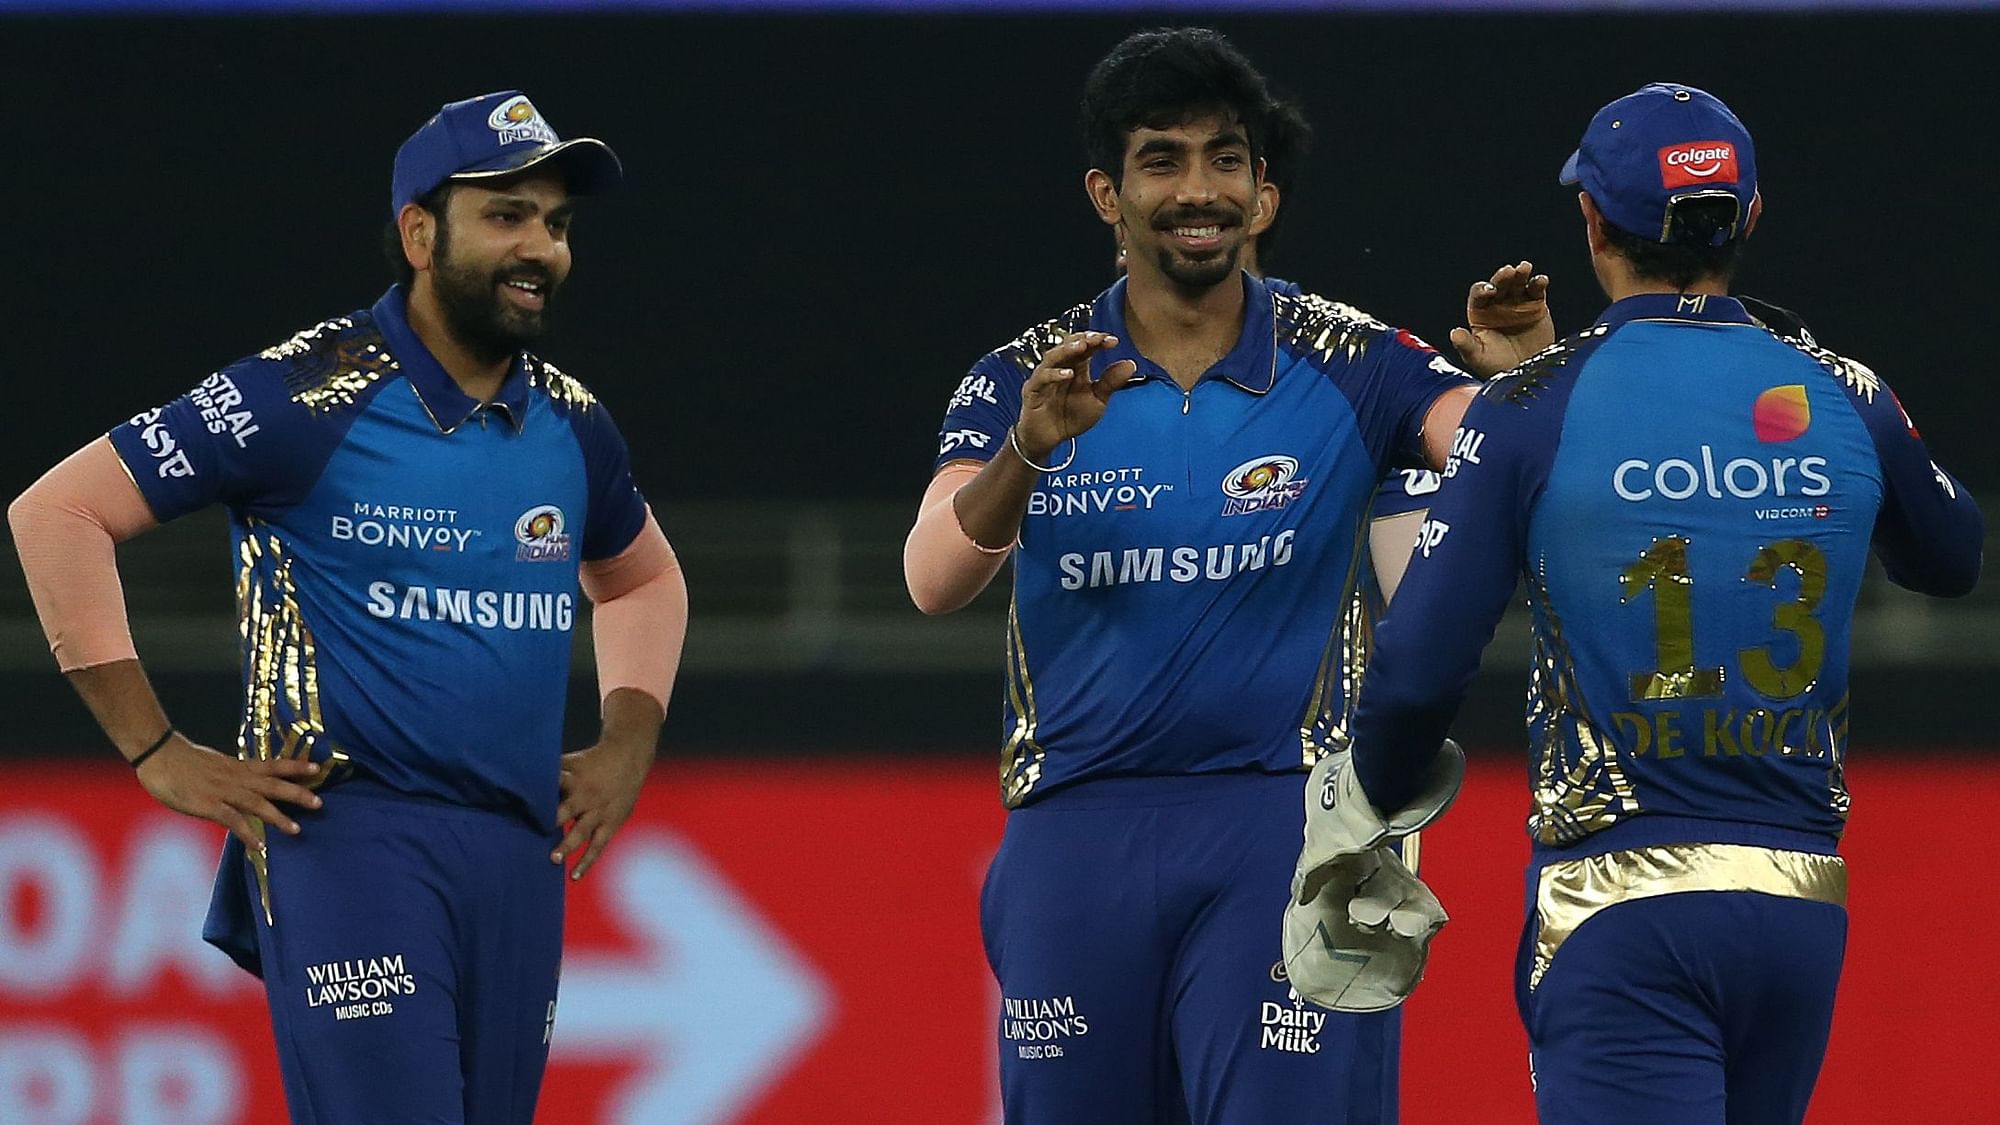 Whether with the bat or the ball, Mumbai Indians have performed better and with more consistency than Delhi in this IPL.